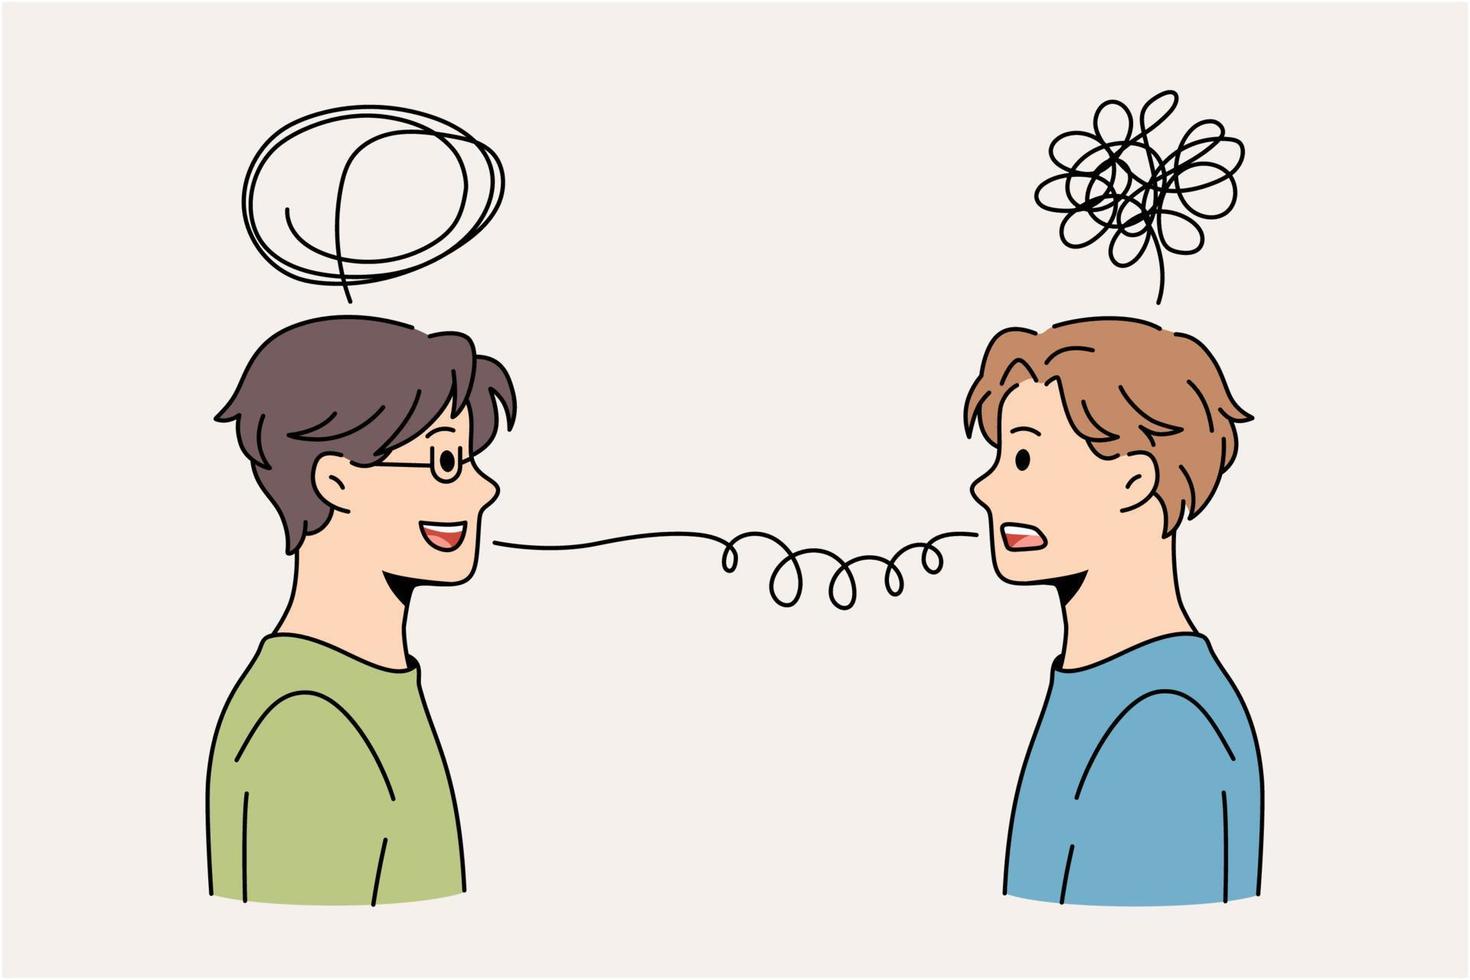 Psychologist and male patient have discussion unravel life problems reel together. Psychiatrist or counselor help man solve troubles at session. Psychology counseling concept. Vector illustration.